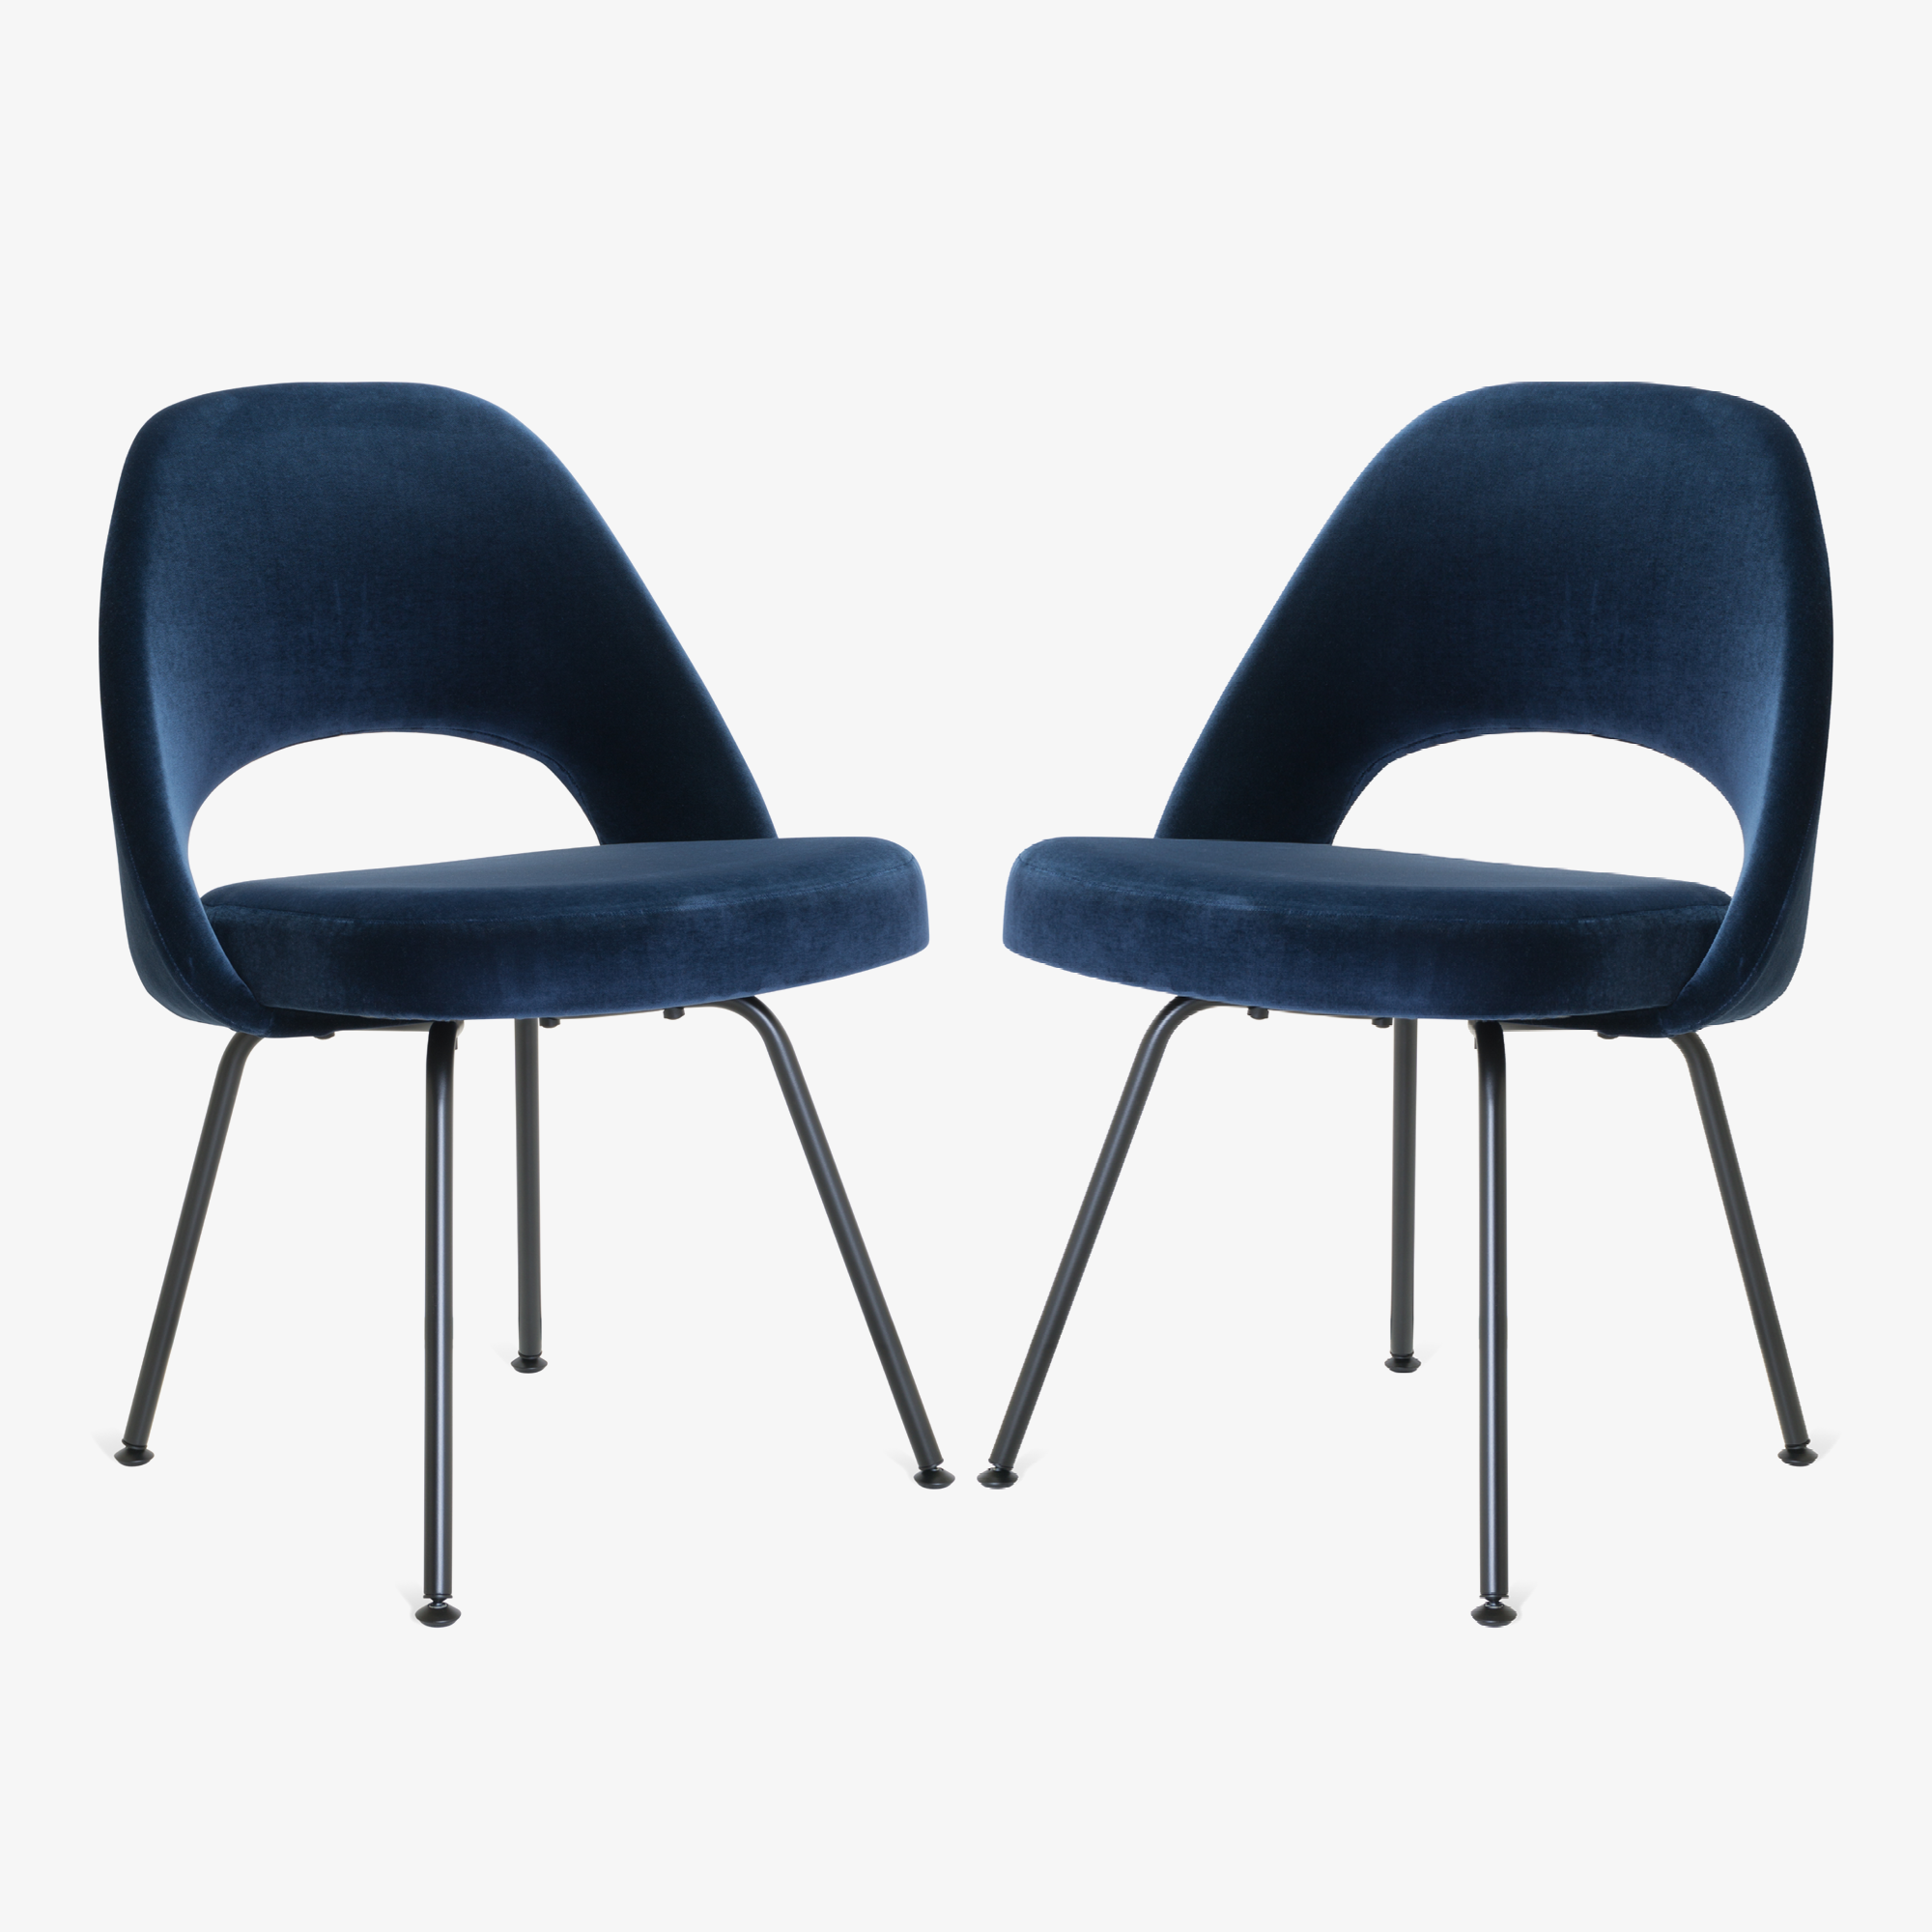 Saarinen Executive Armless Chairs in Navy Velvet, Black Edition3.png